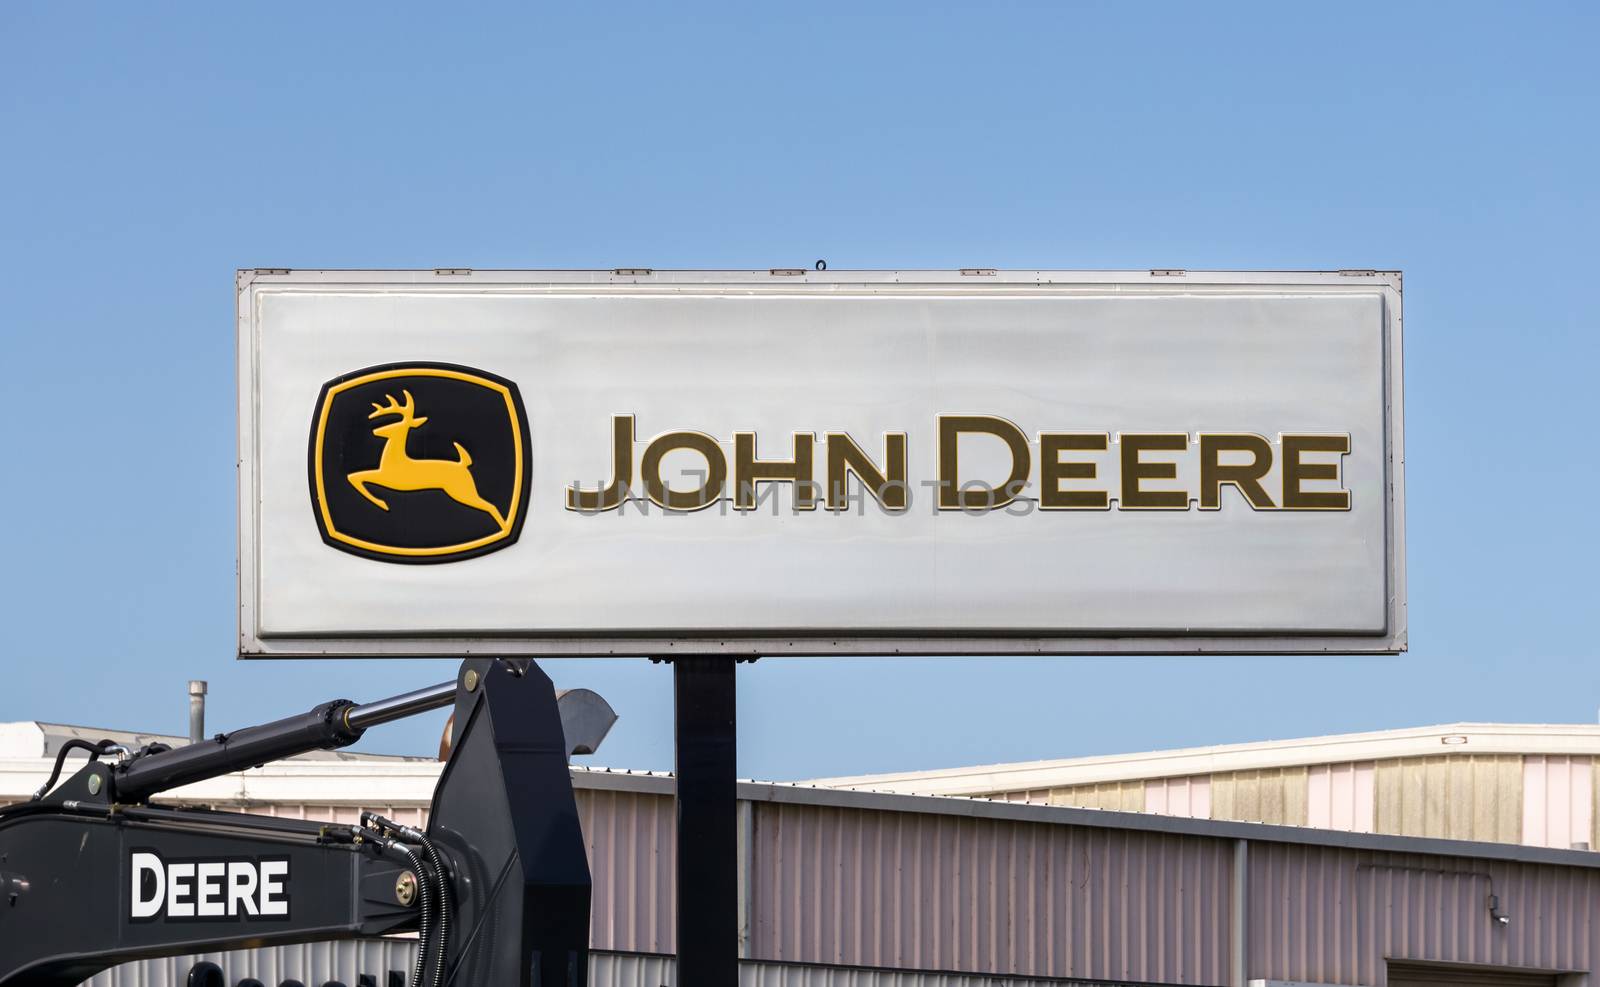 LOS ANGELES, CA/USA - JULY 11, 2015: John Deere equipment dealership sign and logo. Deere & Company is an American corporation that manufactures agricultural, construction and lawn care equipment.